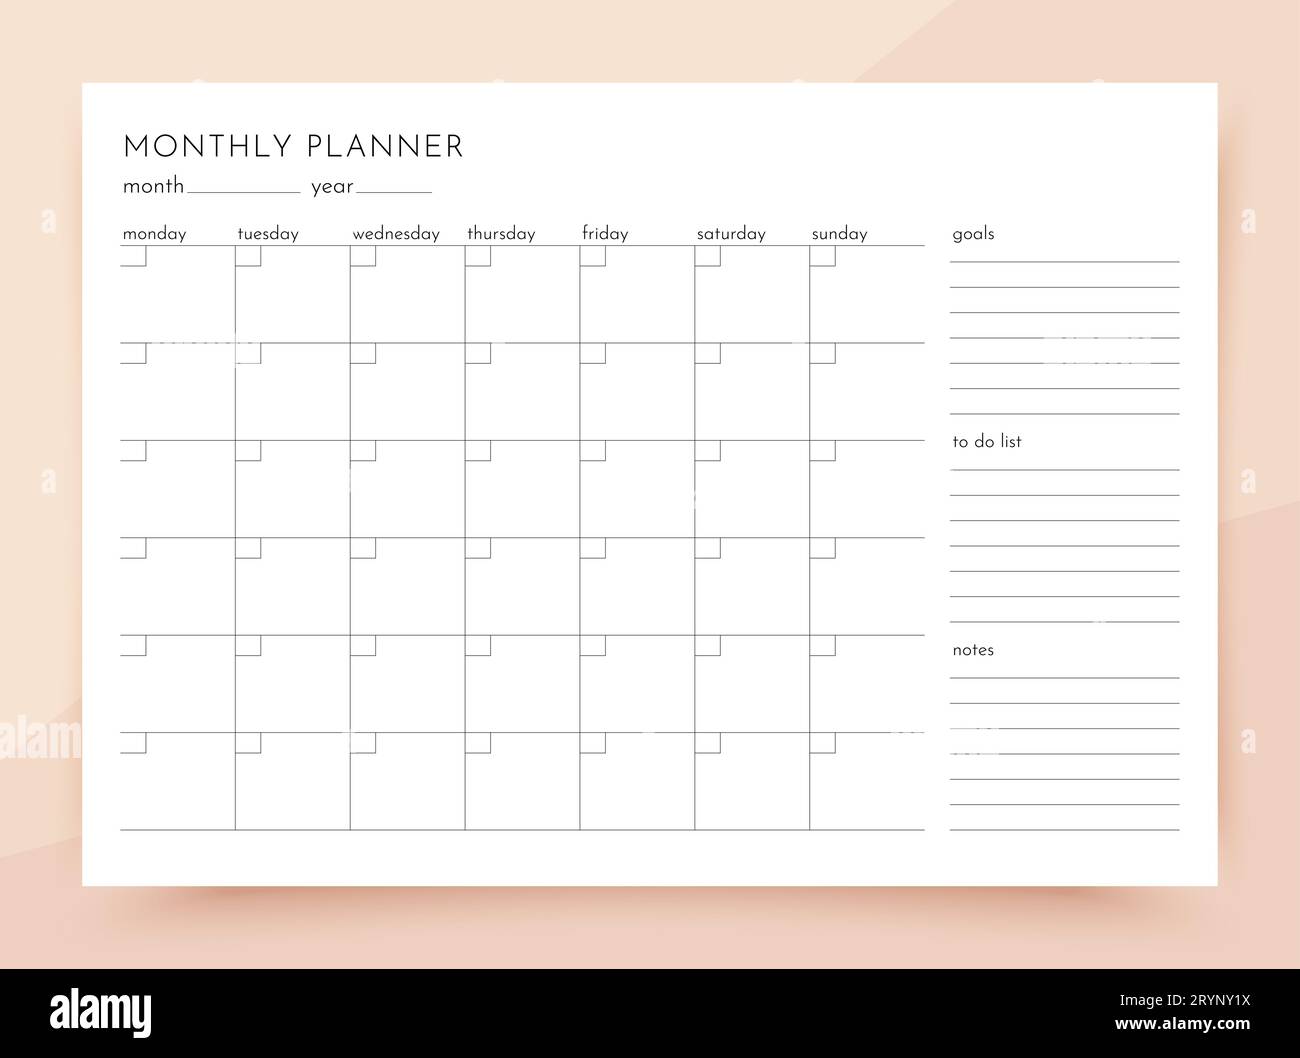 Monthly planner. Timetable for month with goals, to do list and